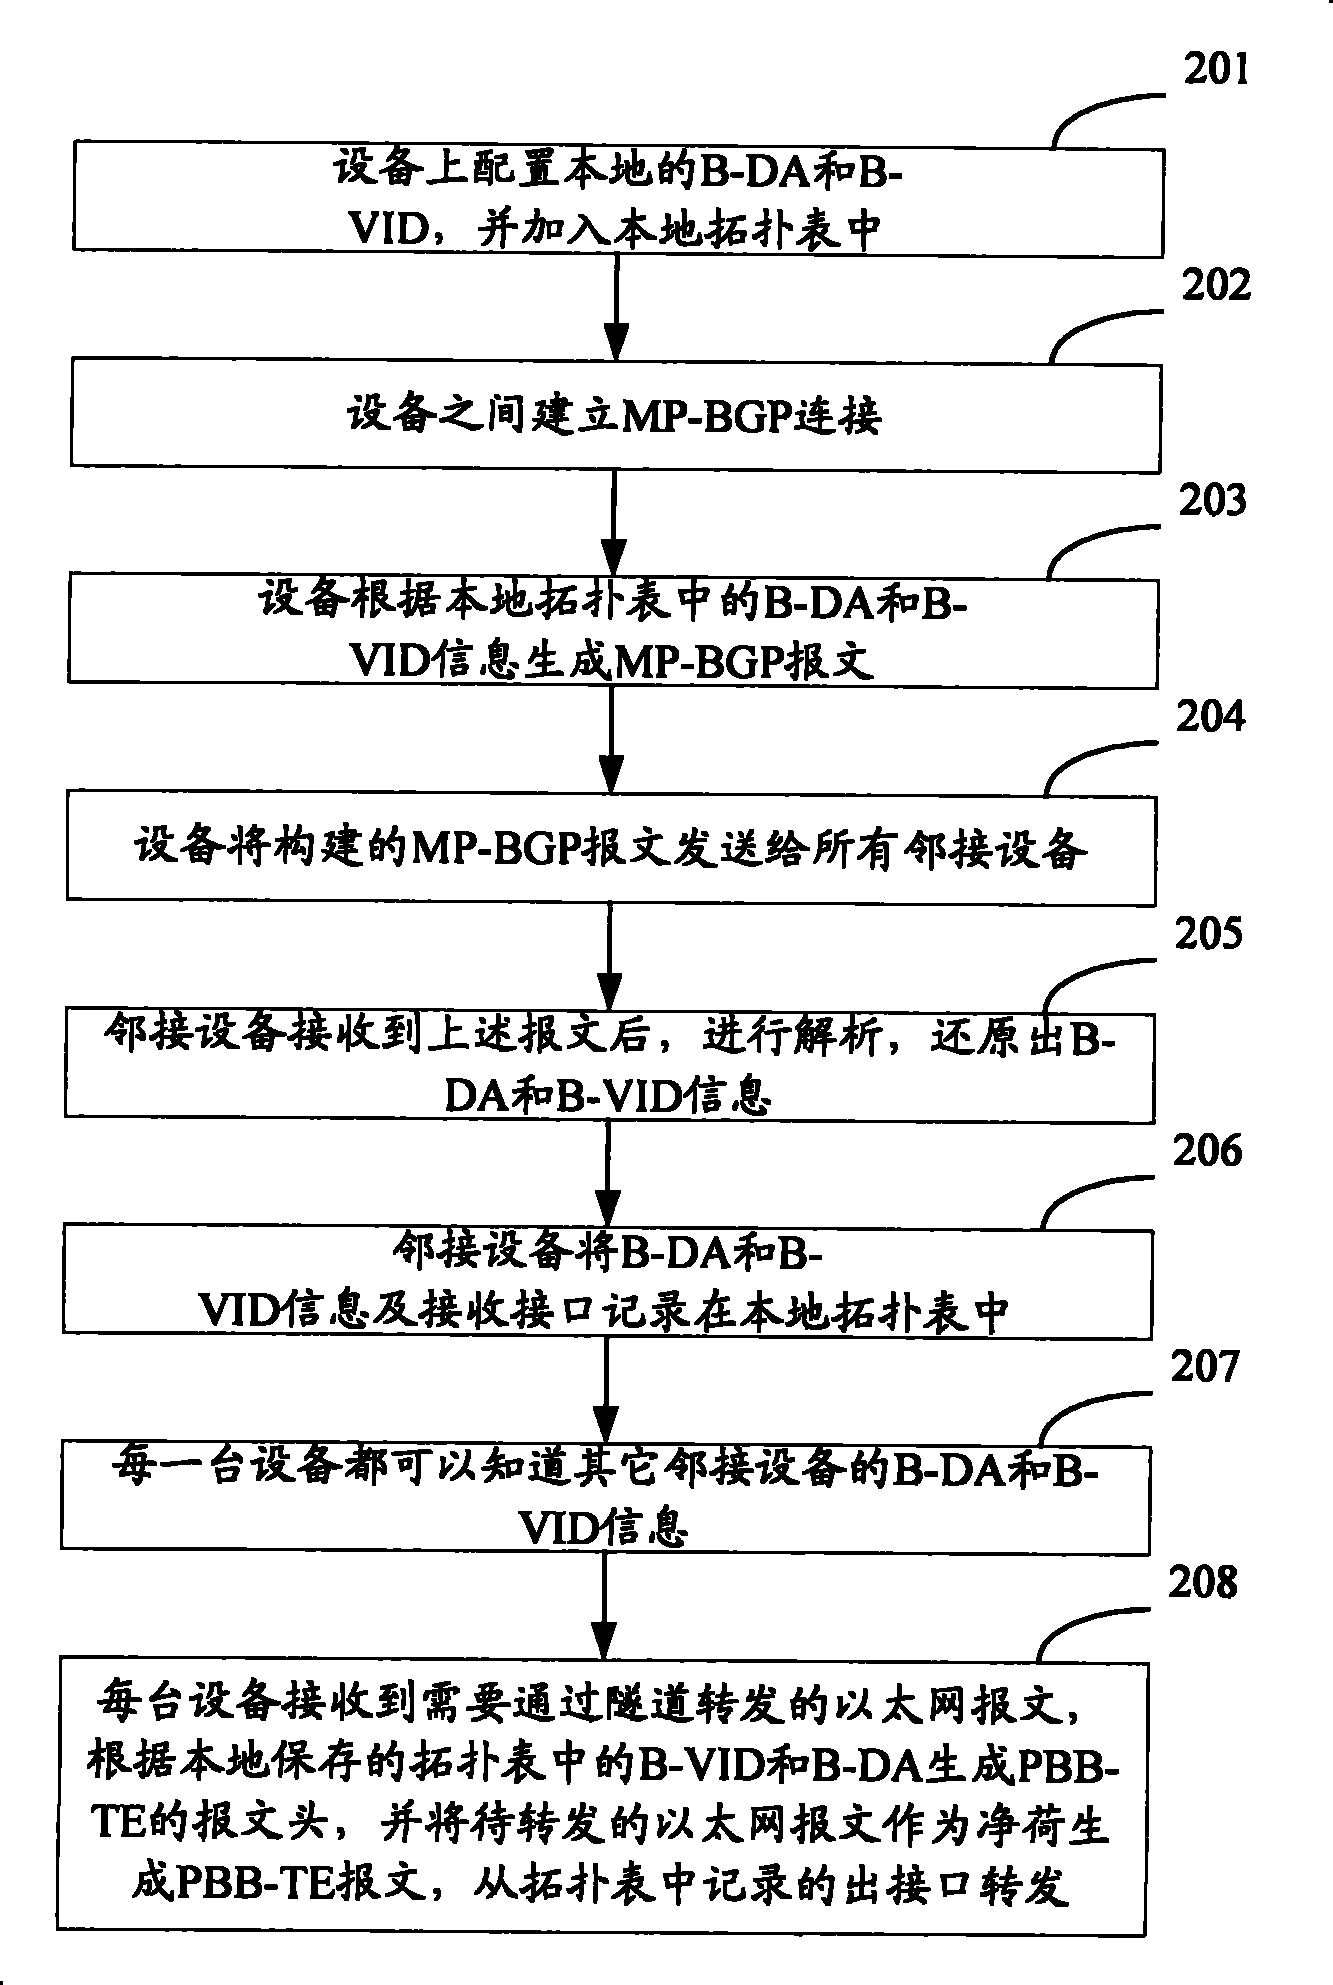 Signalling control method, system and apparatus